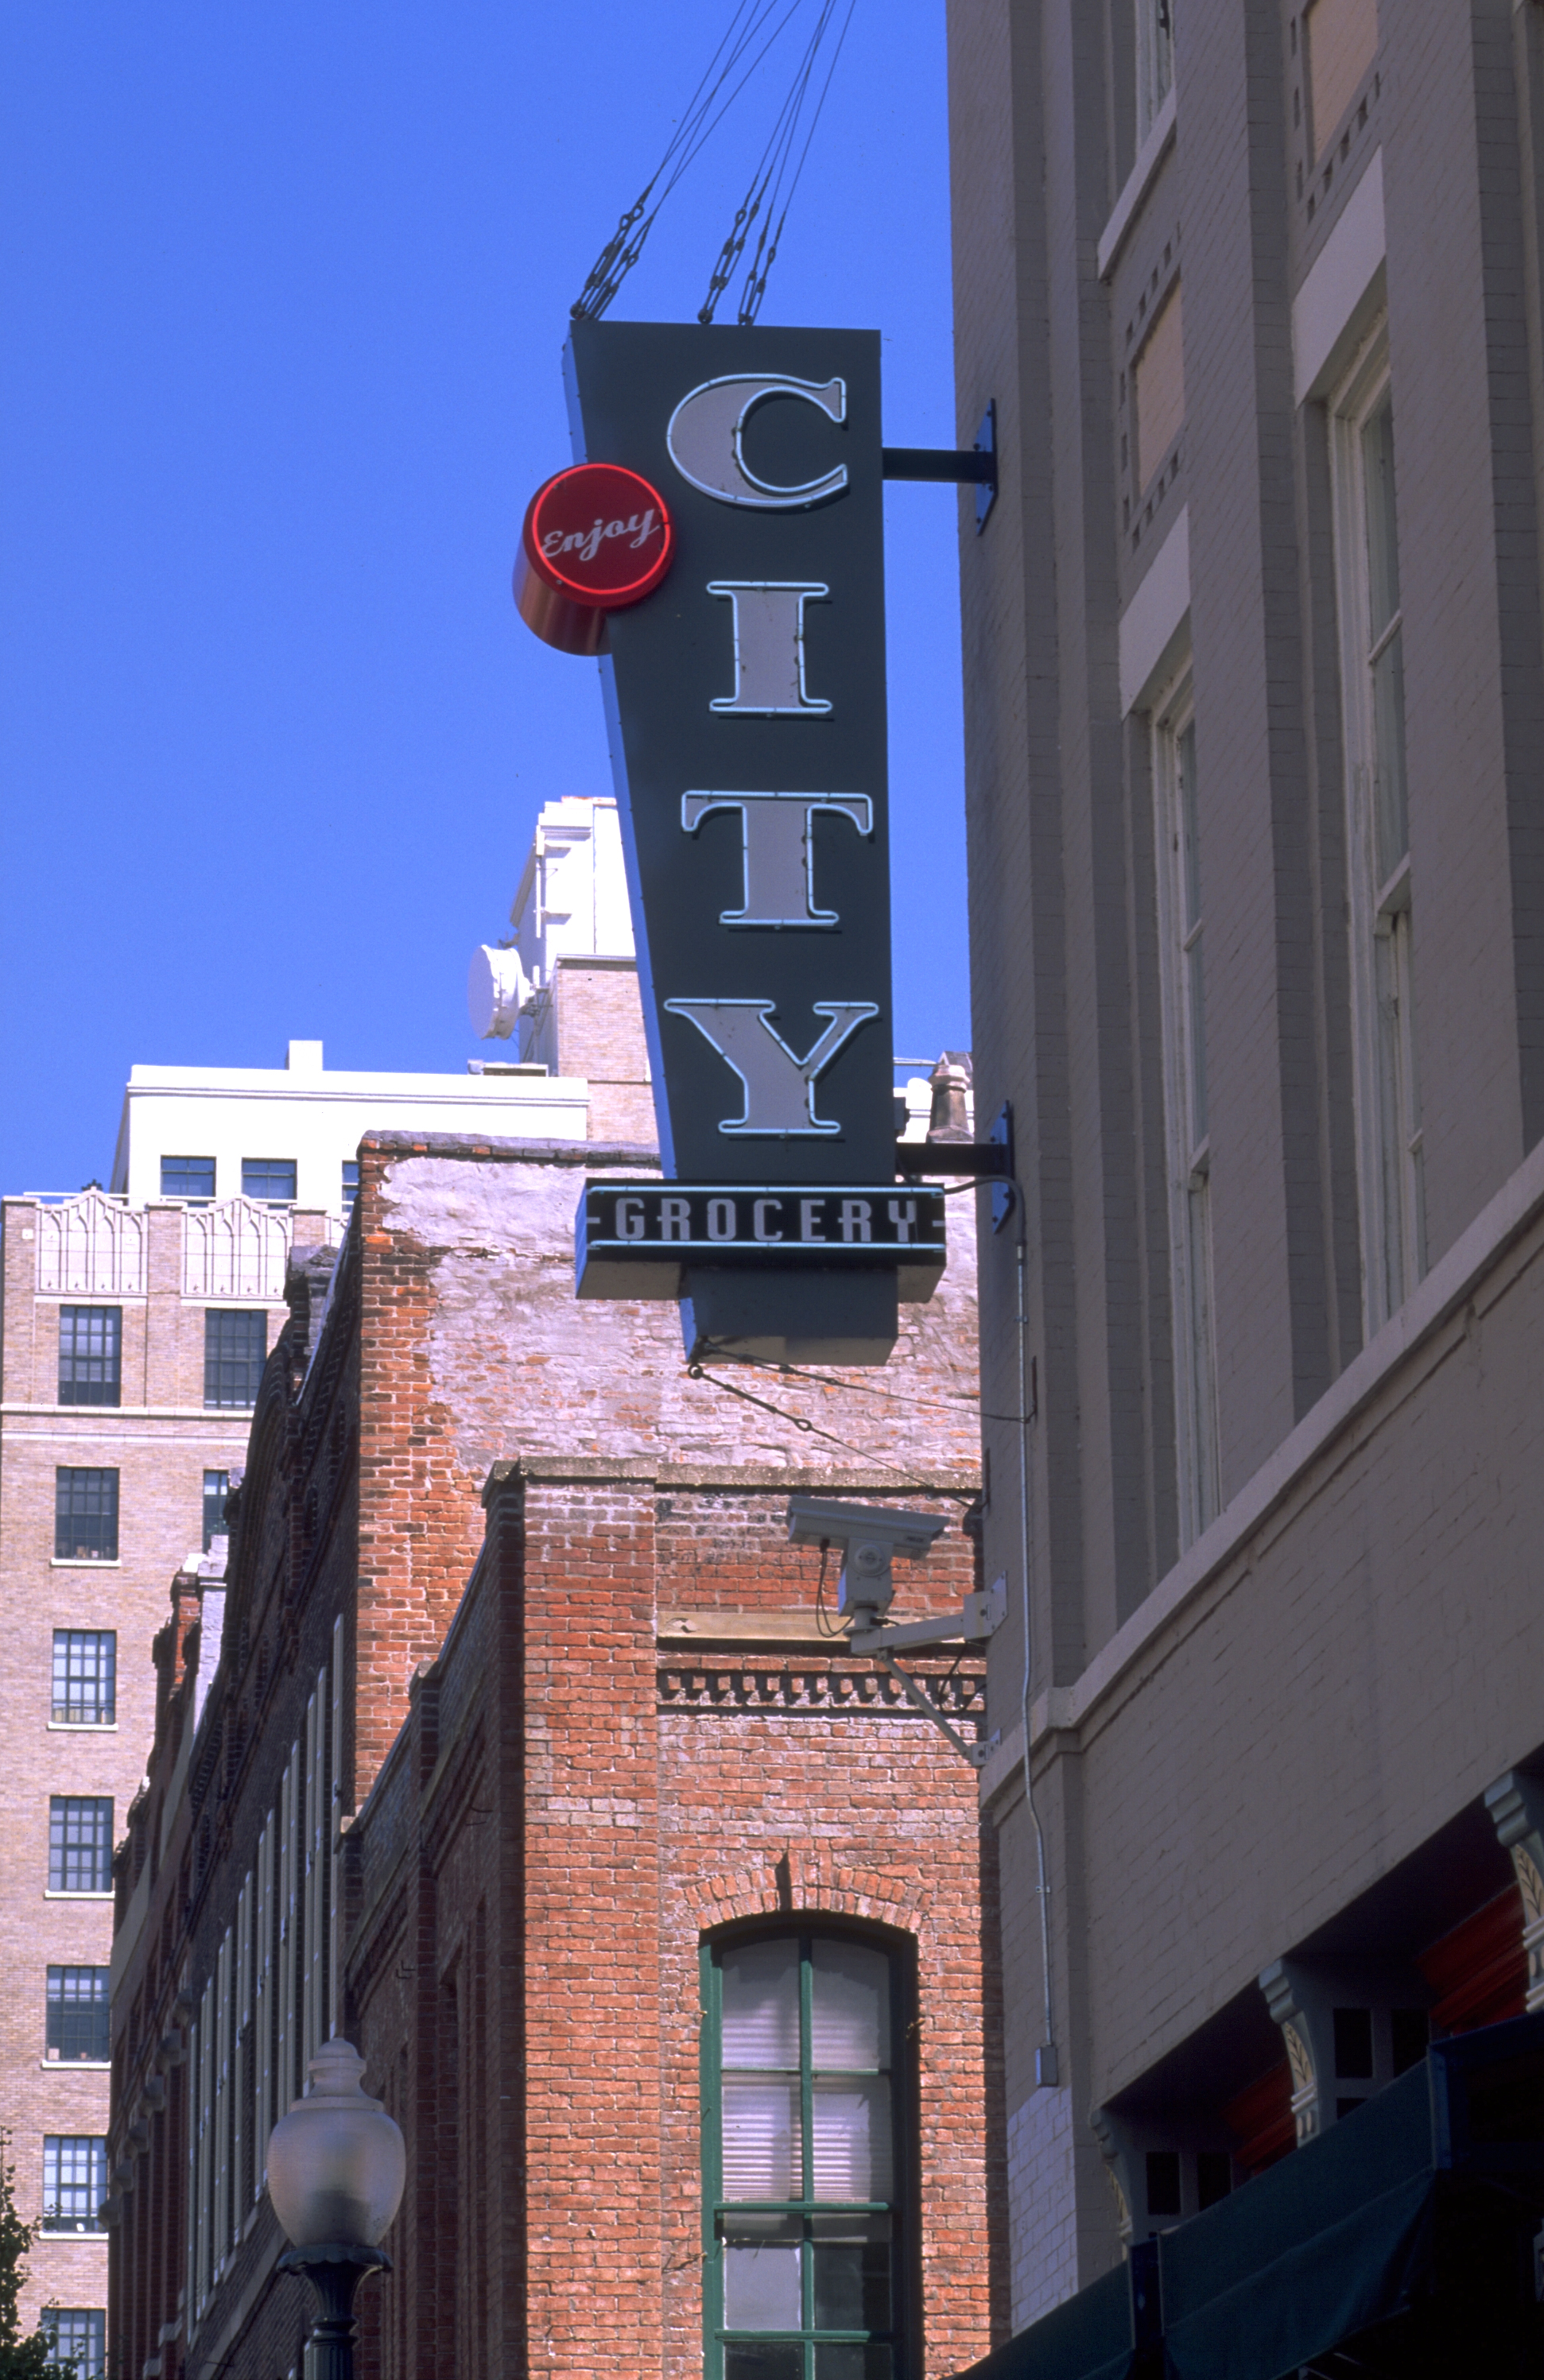  City Grocery exterior signage  Branding creative and design by Chuck Mitchell  Front Street Memphis, TN 